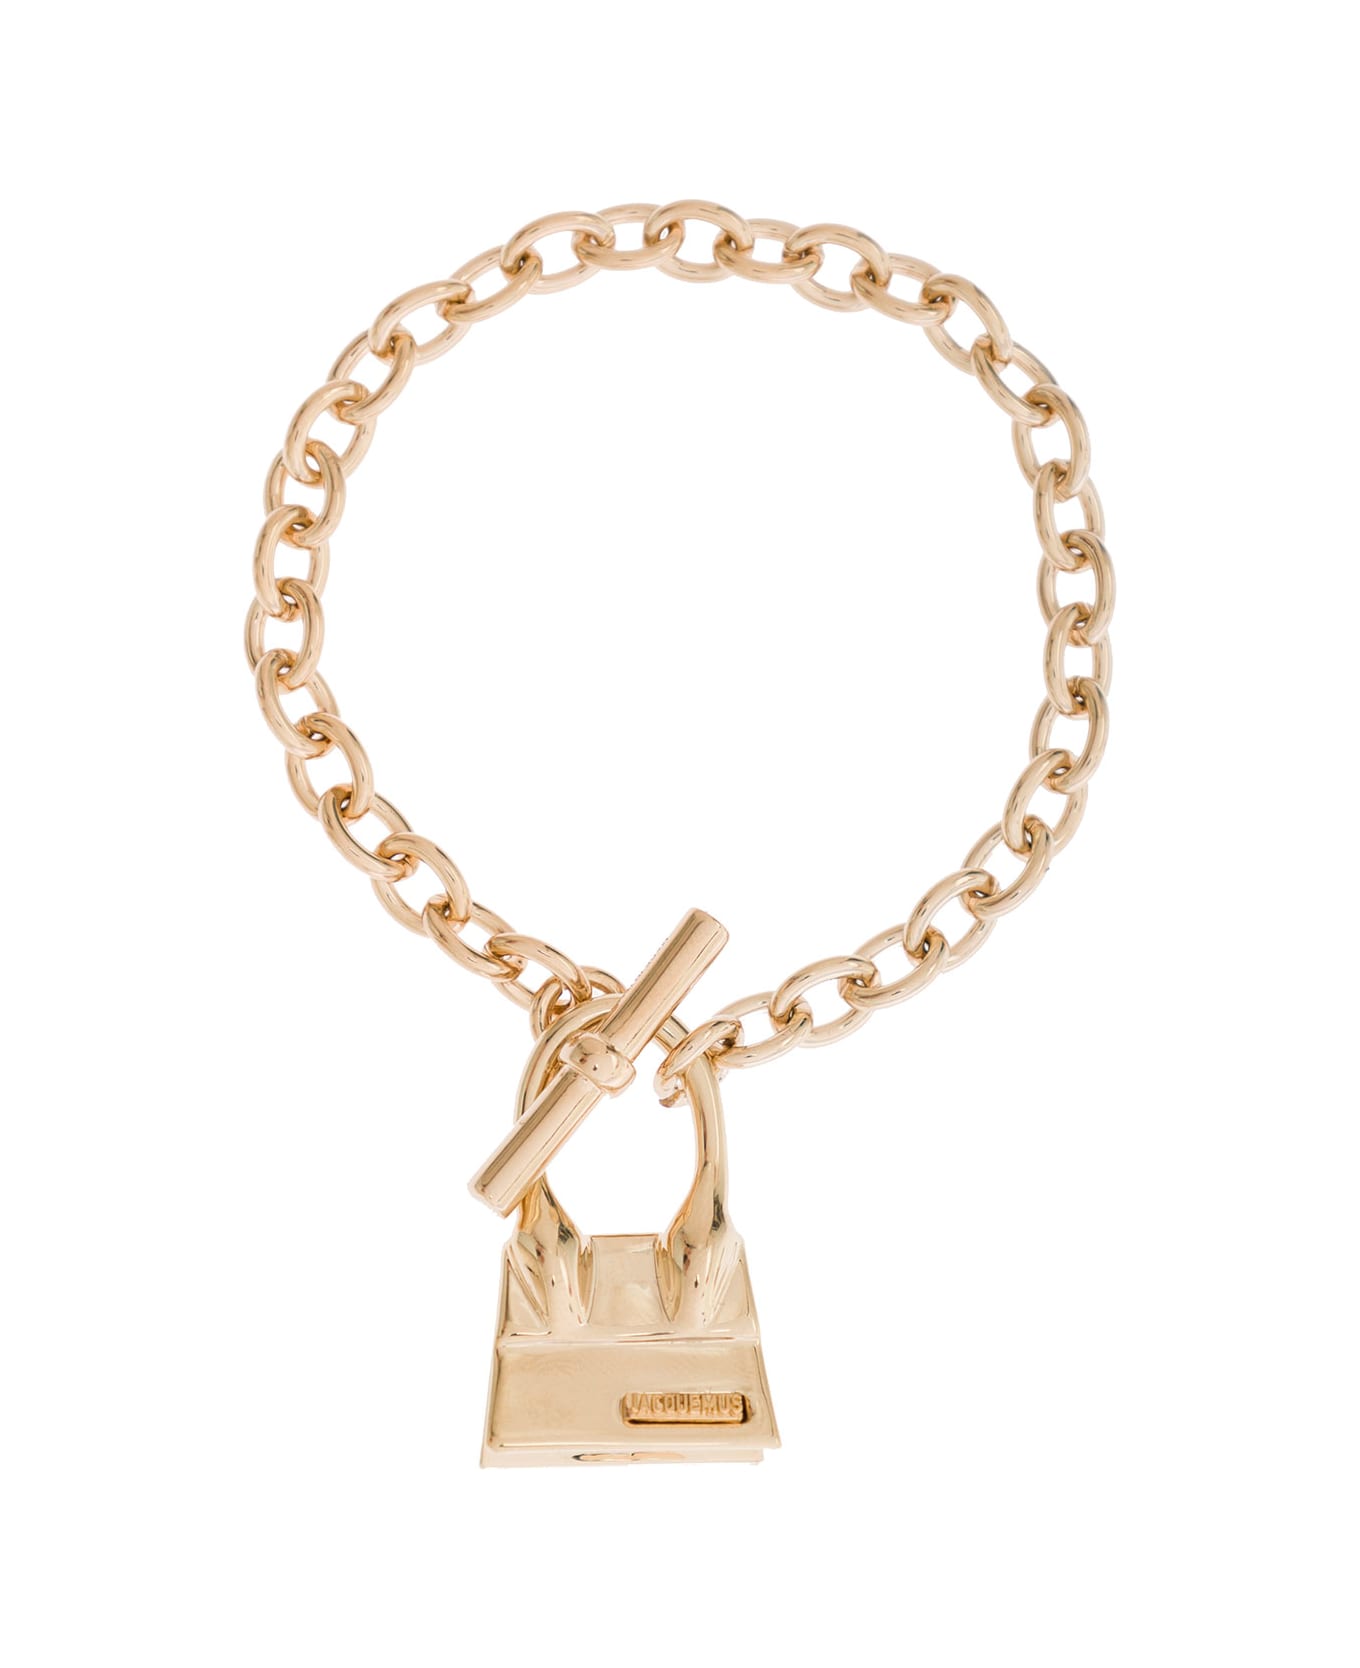 Jacquemus Chain Bracelet With Chiquito Charm - LIGHT GOLD